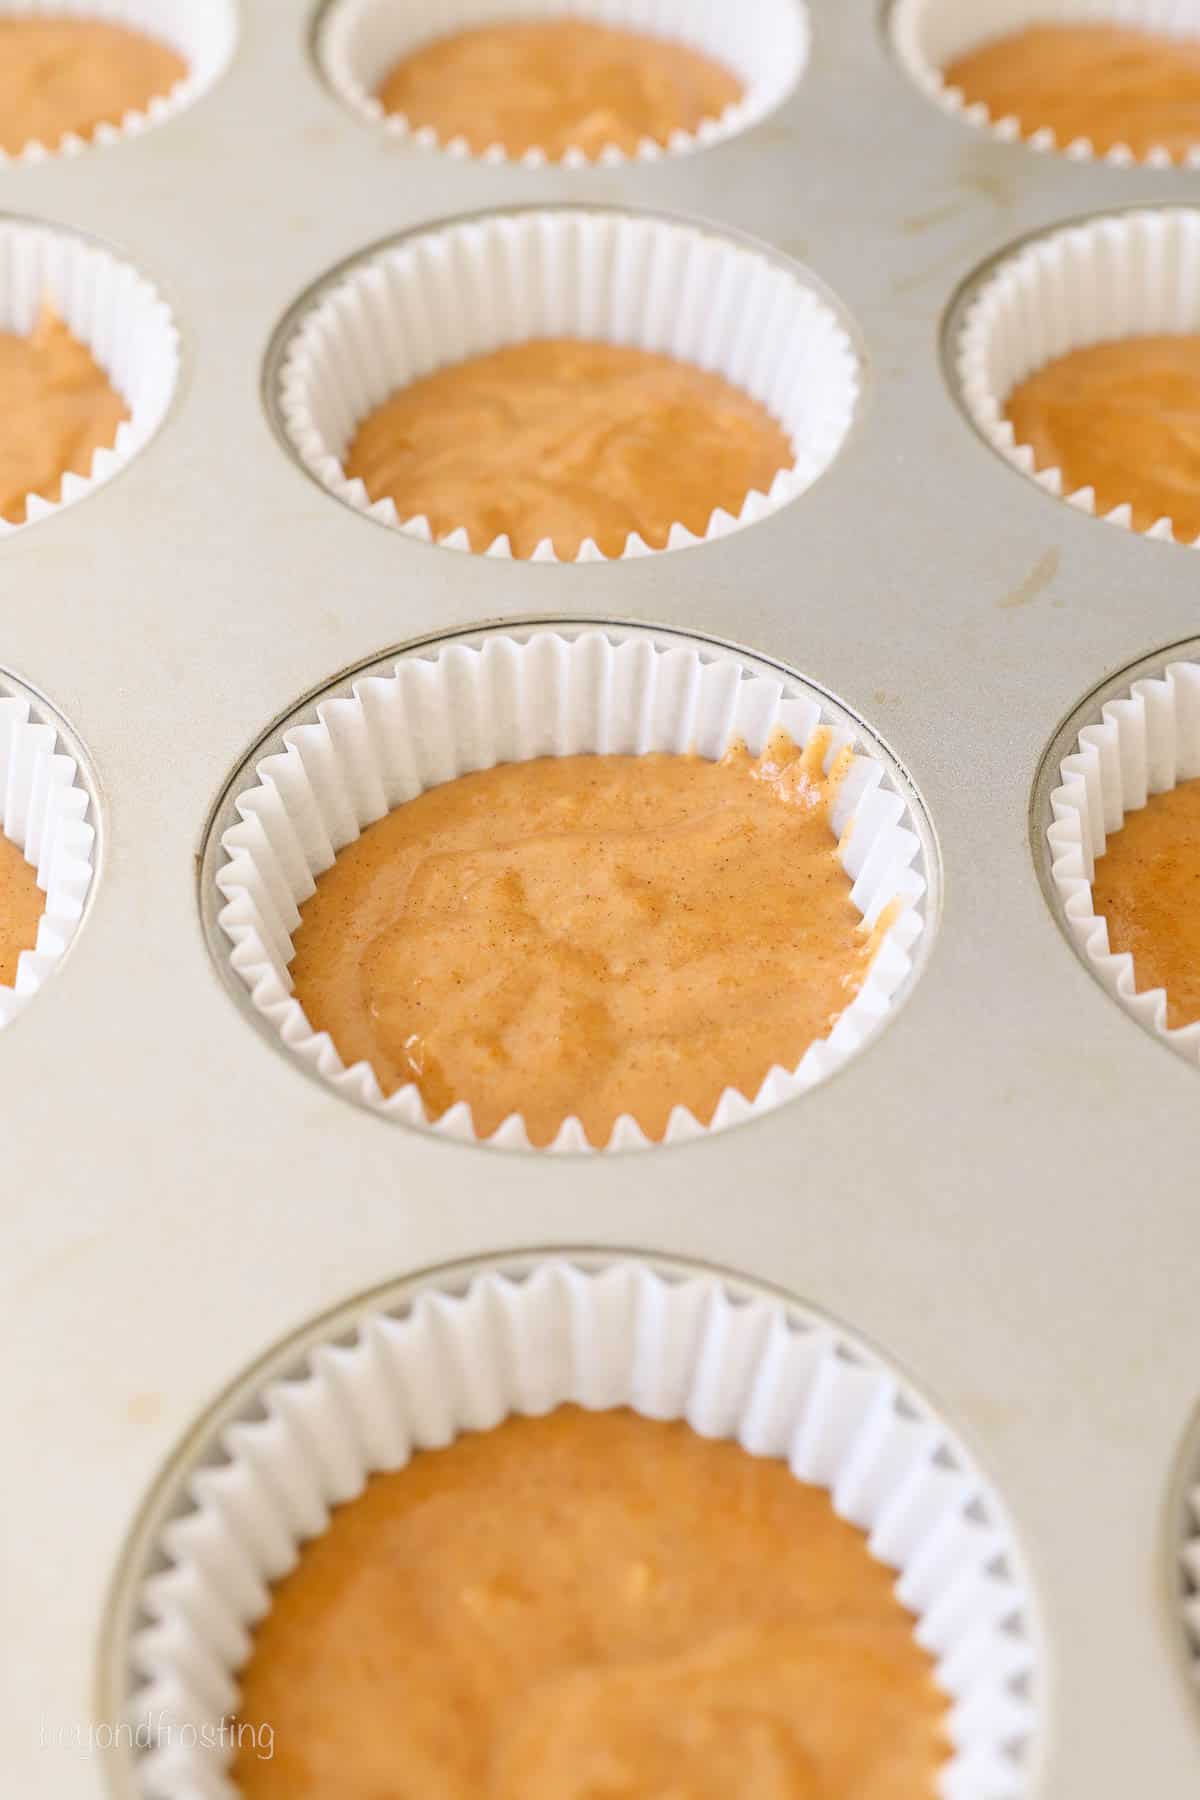 cupcake pan with liners filled with batter for pumpkin cupcakes